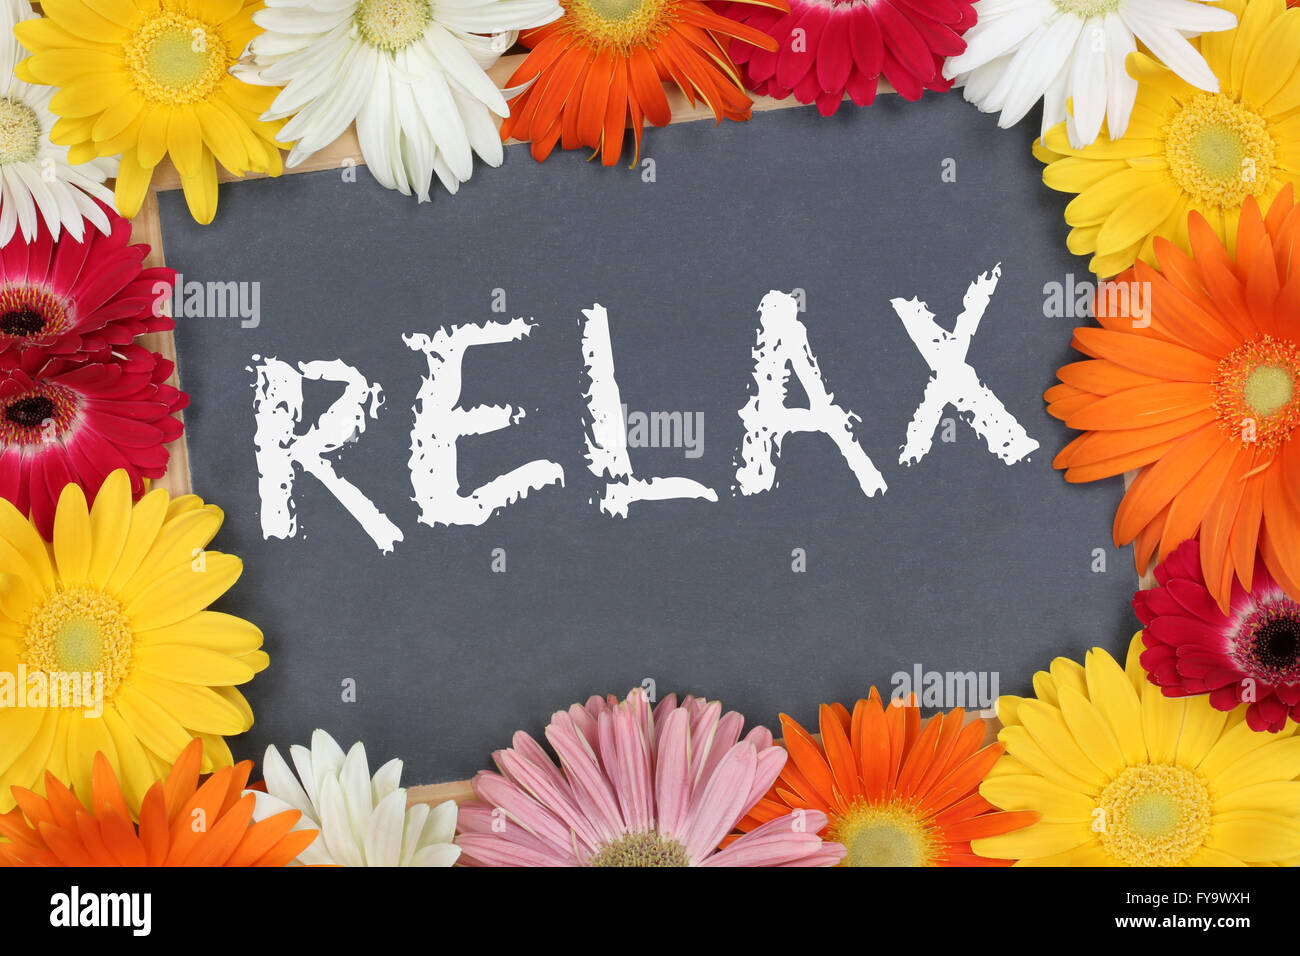 Relax relaxing garden with colorful flowers flower board sign Stock Photo